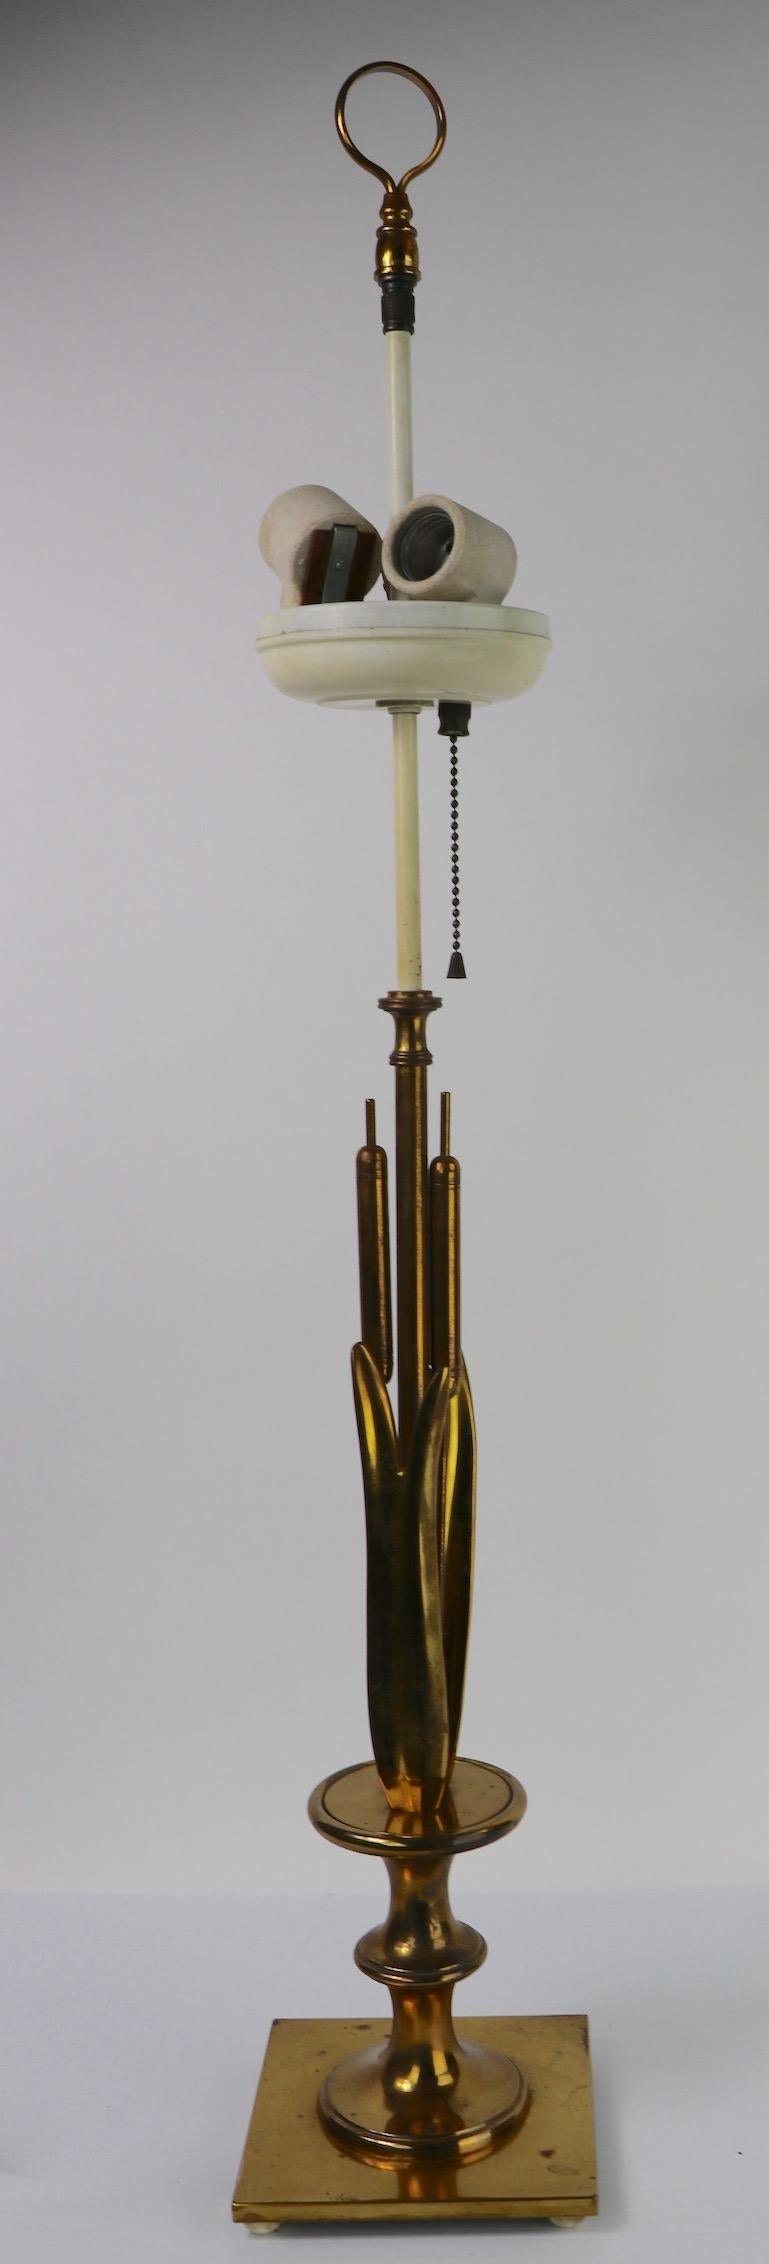 Brass table lamp with cattails. The lamp accepts three standard screw in bulbs, each operates independently to control brightness. Original clean and working condition, lamp does not include shade.